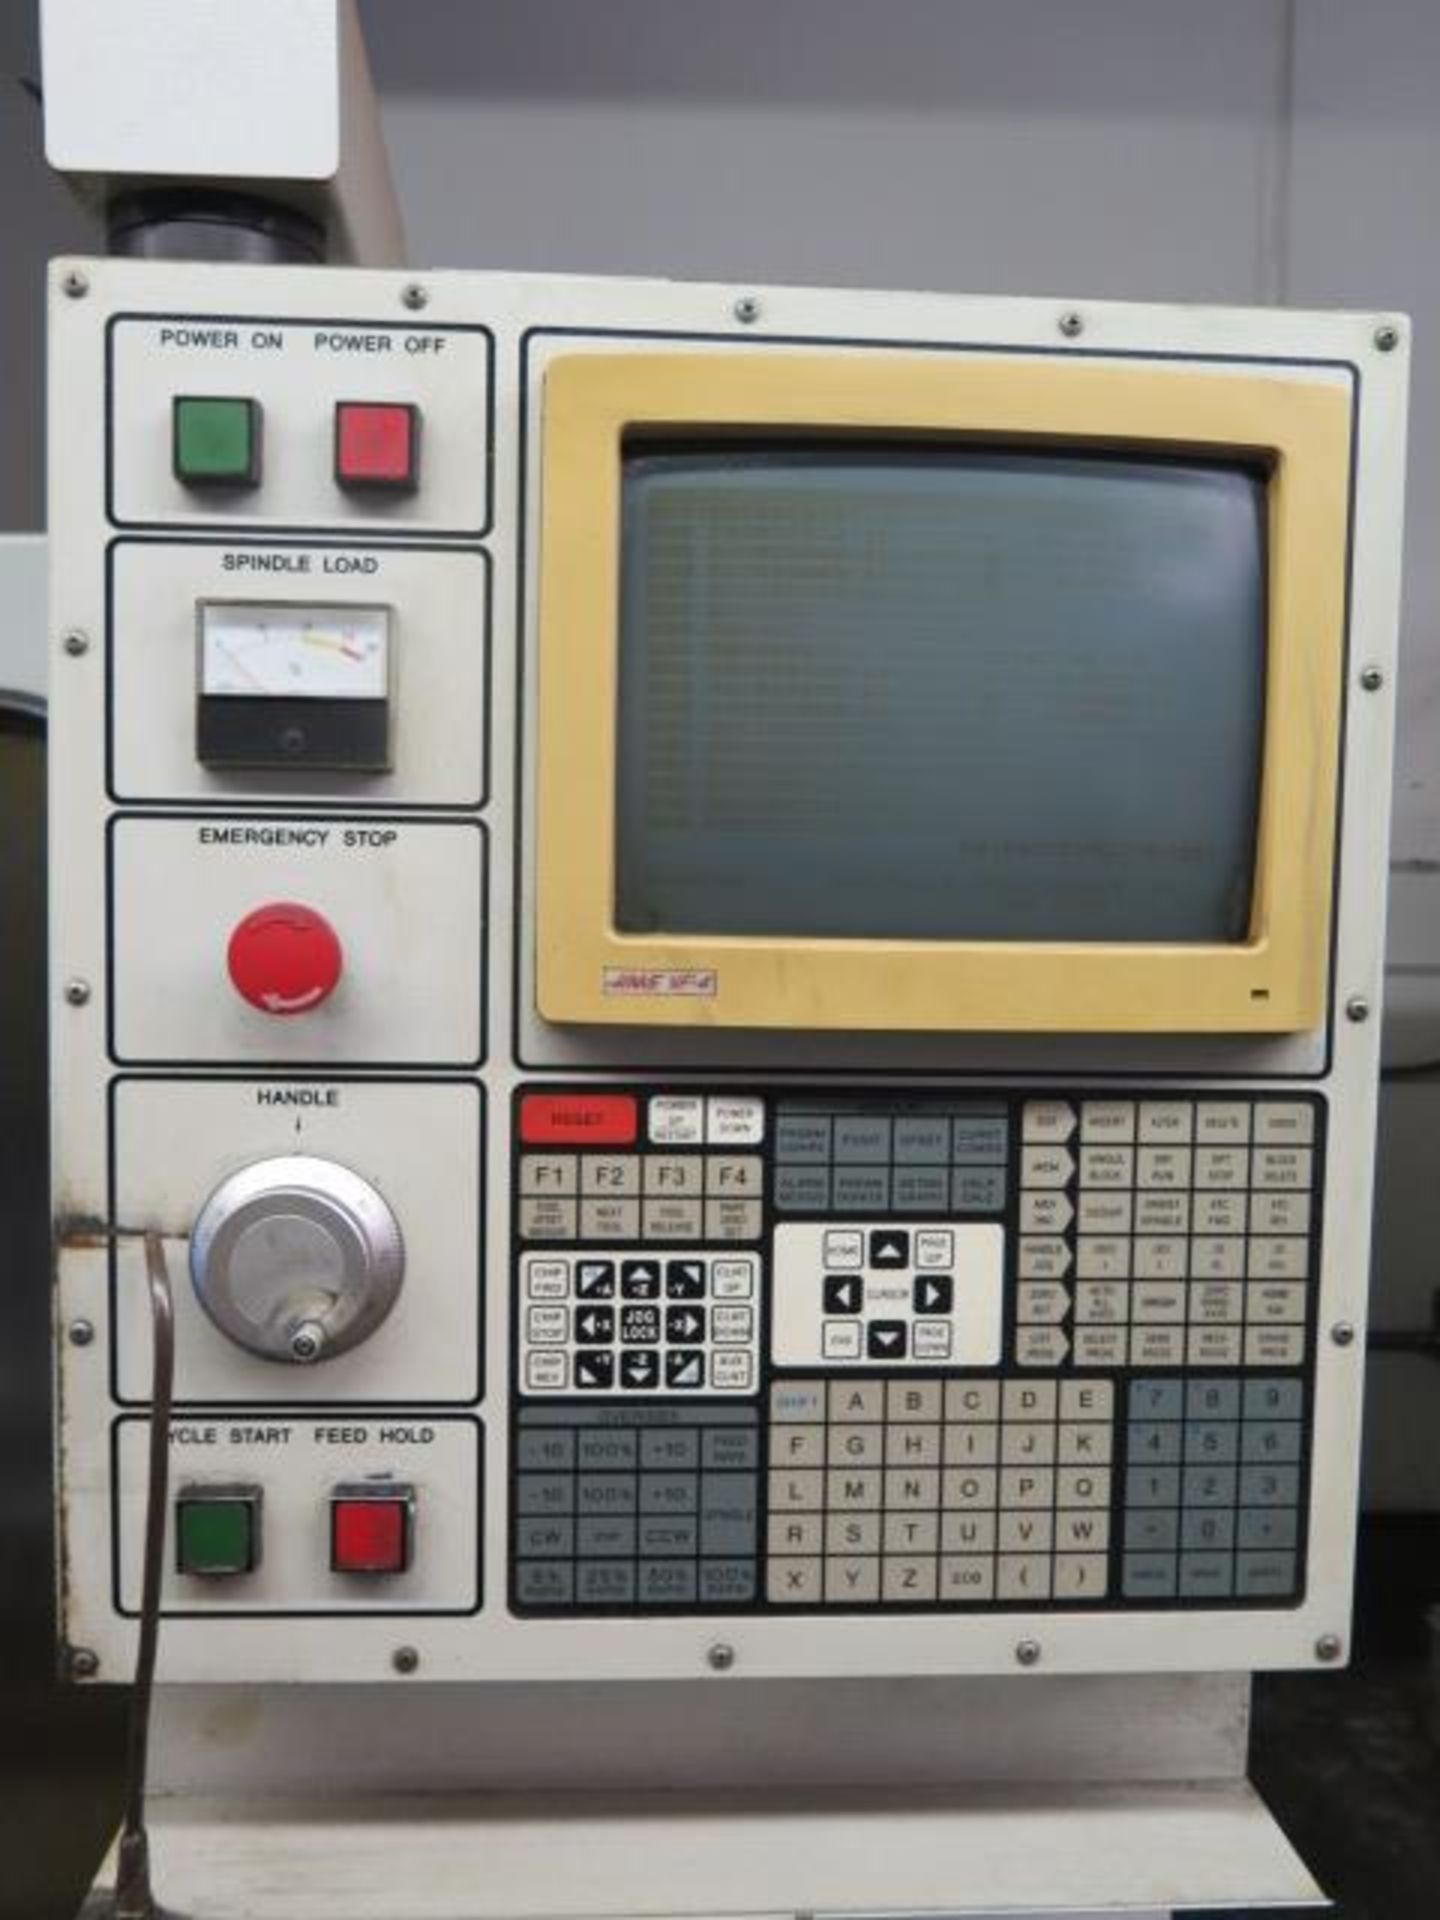 1994 Haas VF-2 CNC VMC, s/n 3258 w/ Haas Controls, 20-Station ATC, CAT-40 Taper, SOLD AS IS - Image 4 of 16